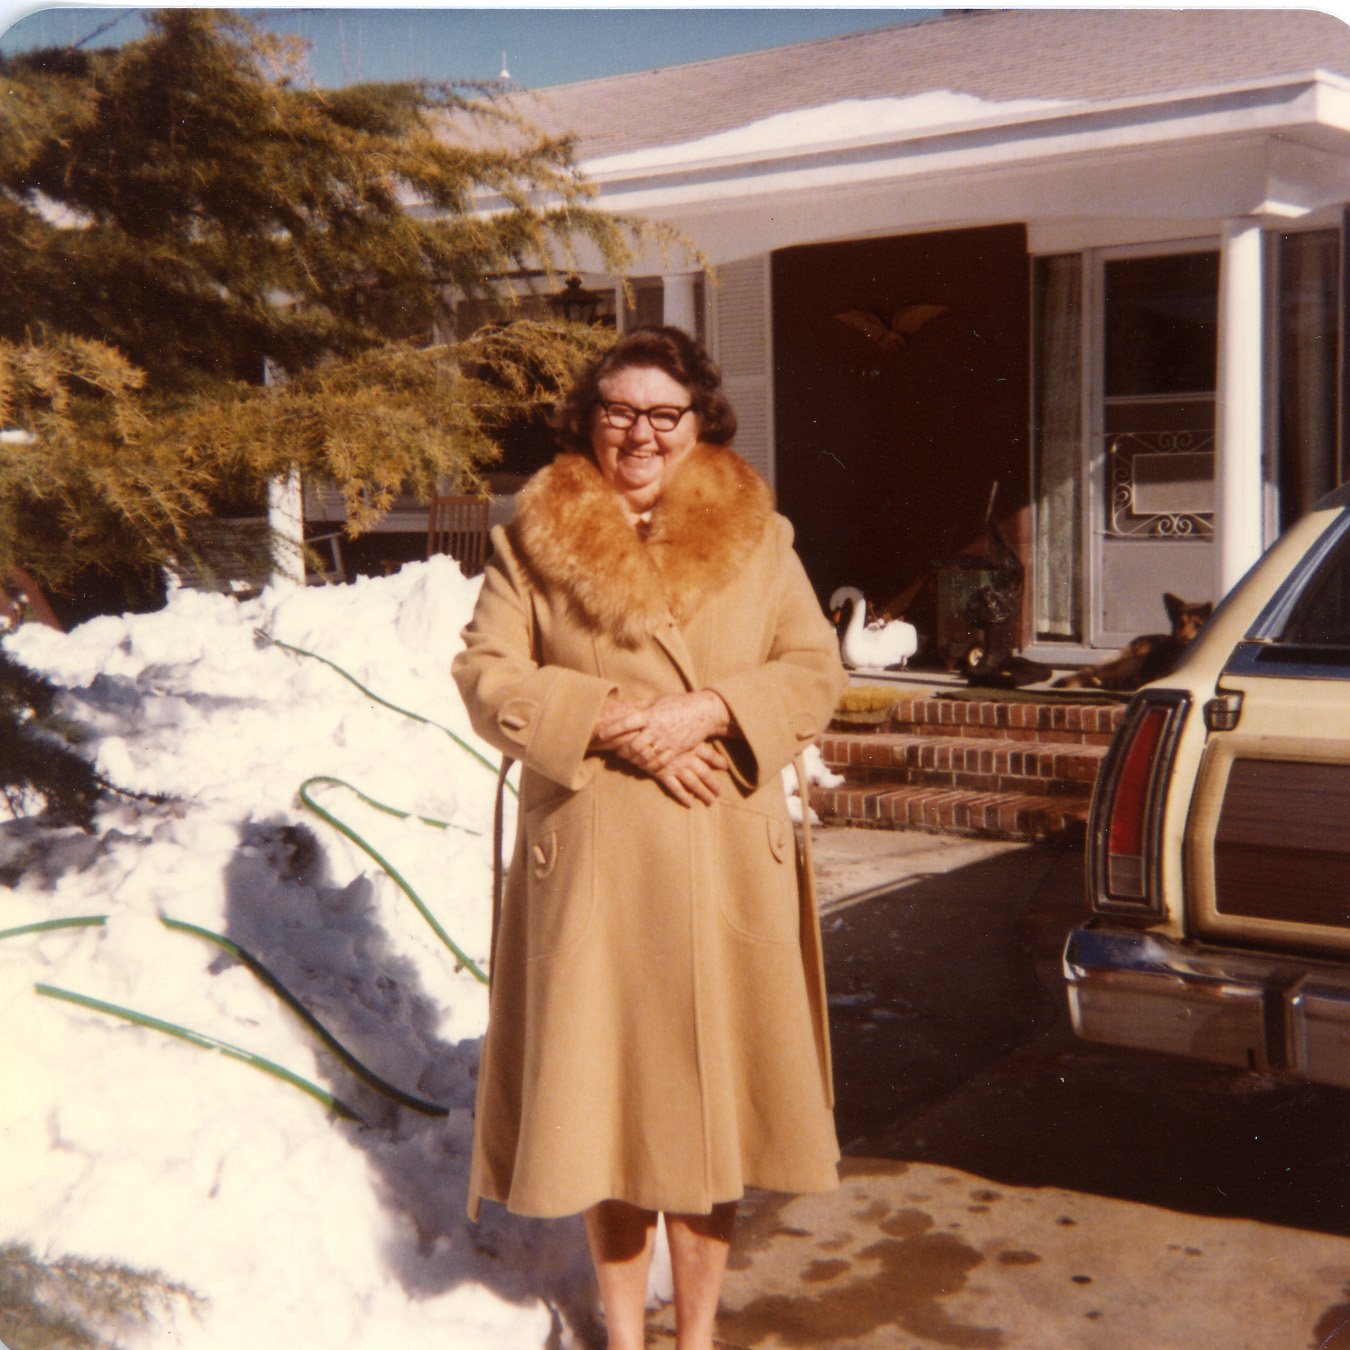 Mary Lee Rose, wife of Harkers Island boatbuilder James Rose, stands in front of their house, circa 1980s.